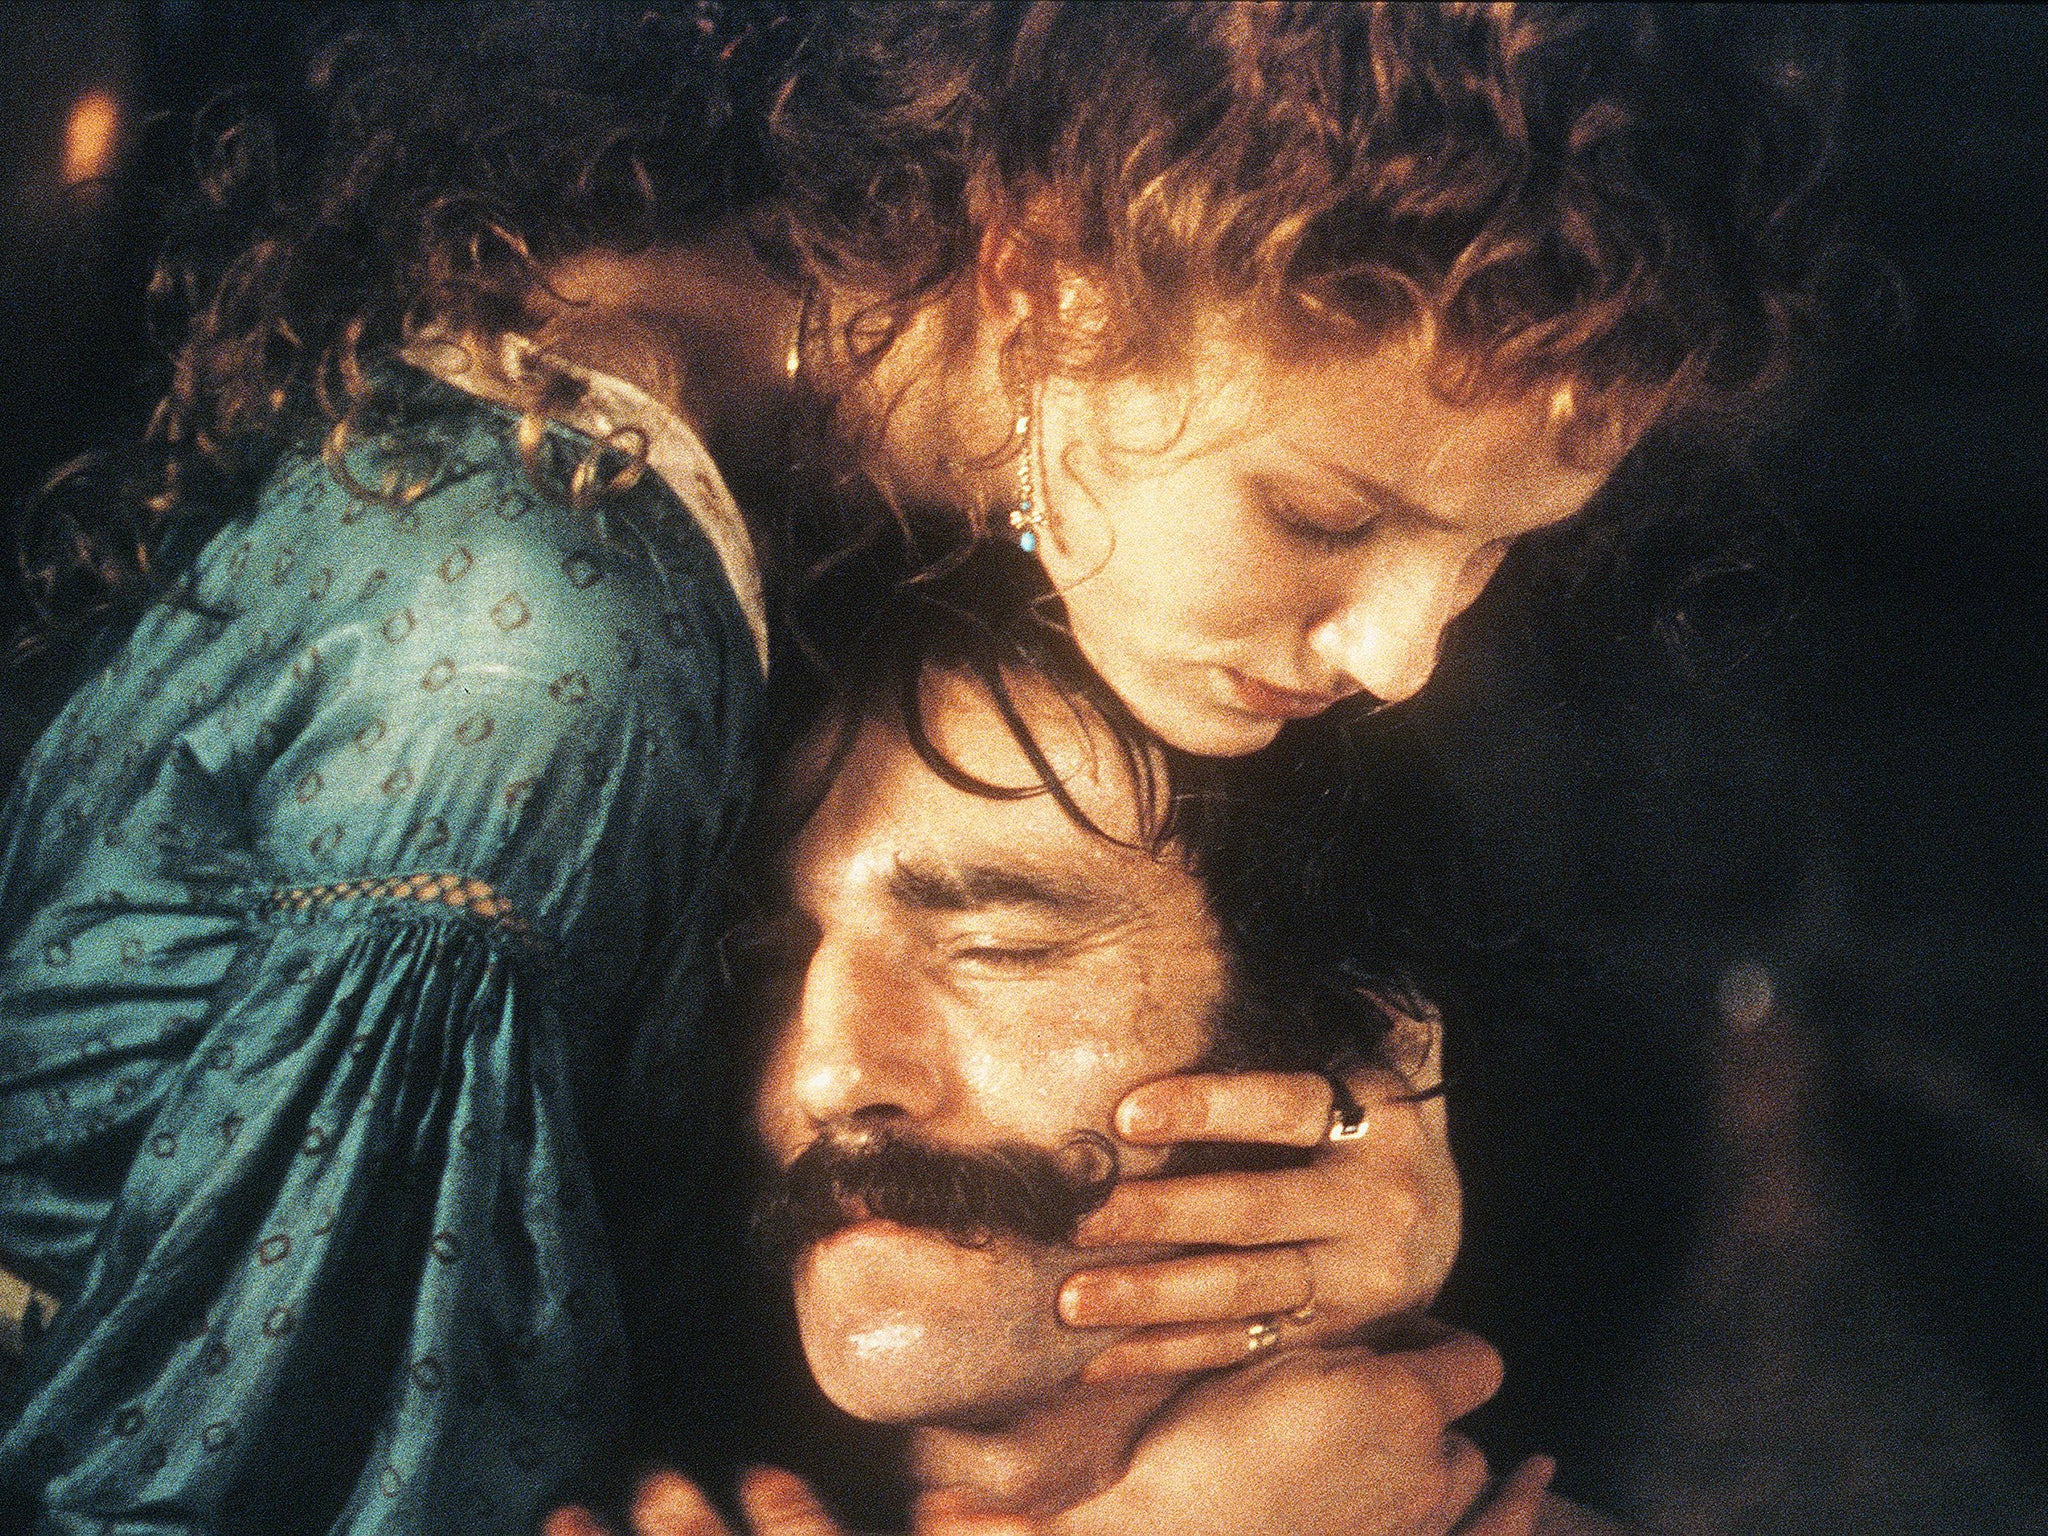 Cameron Diaz and Daniel Day-Lewis in ‘Gangs of New York’